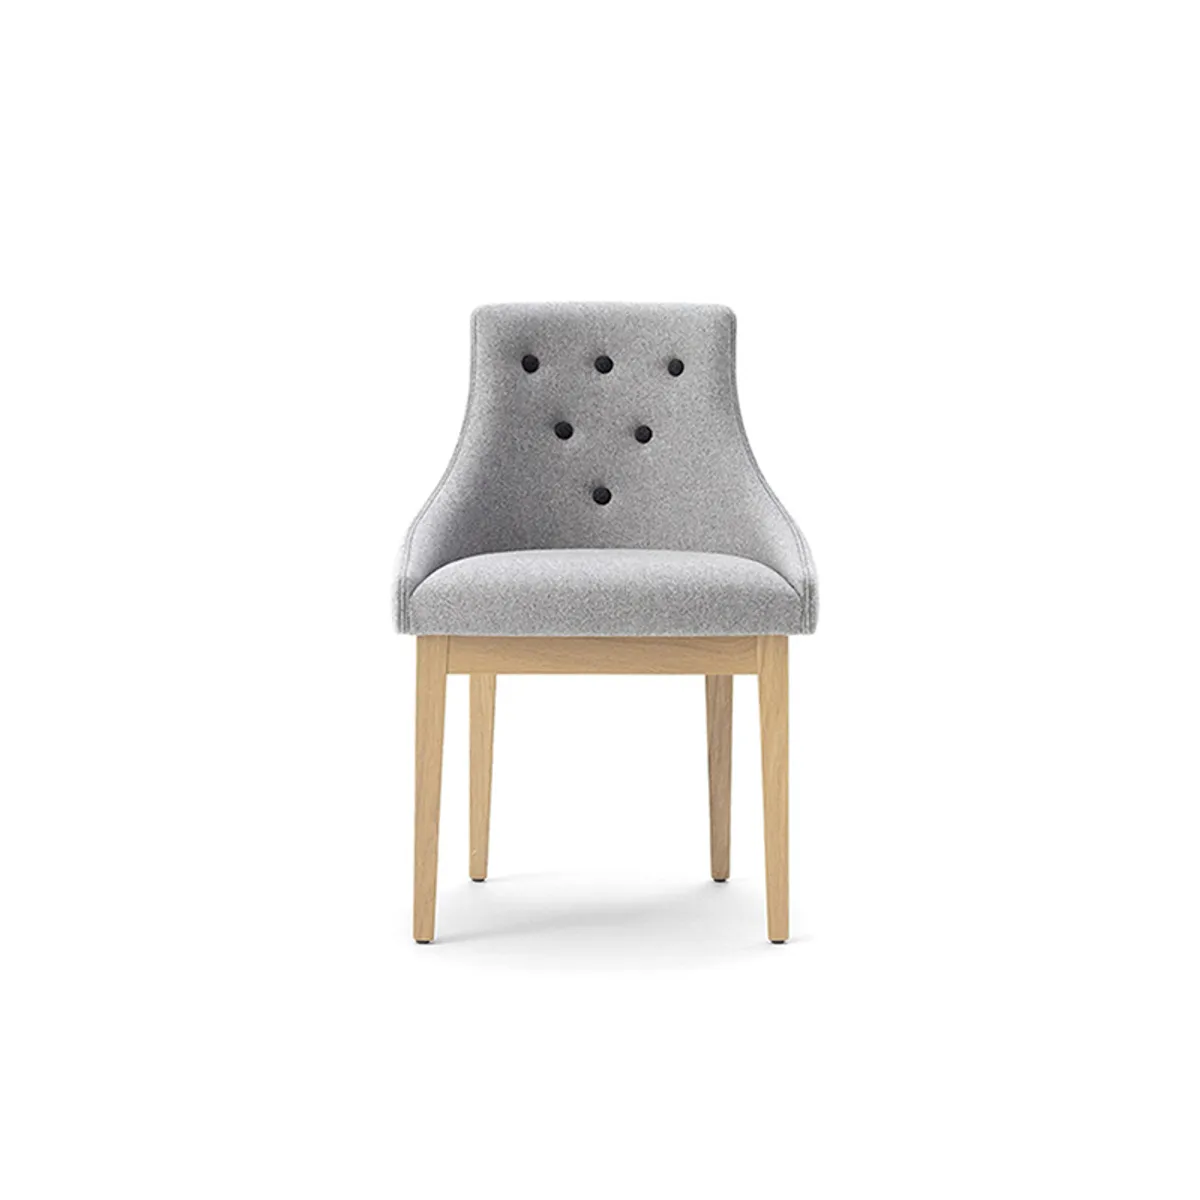 Albert-deluxe-side-chair-quirky-button-back-upholstery